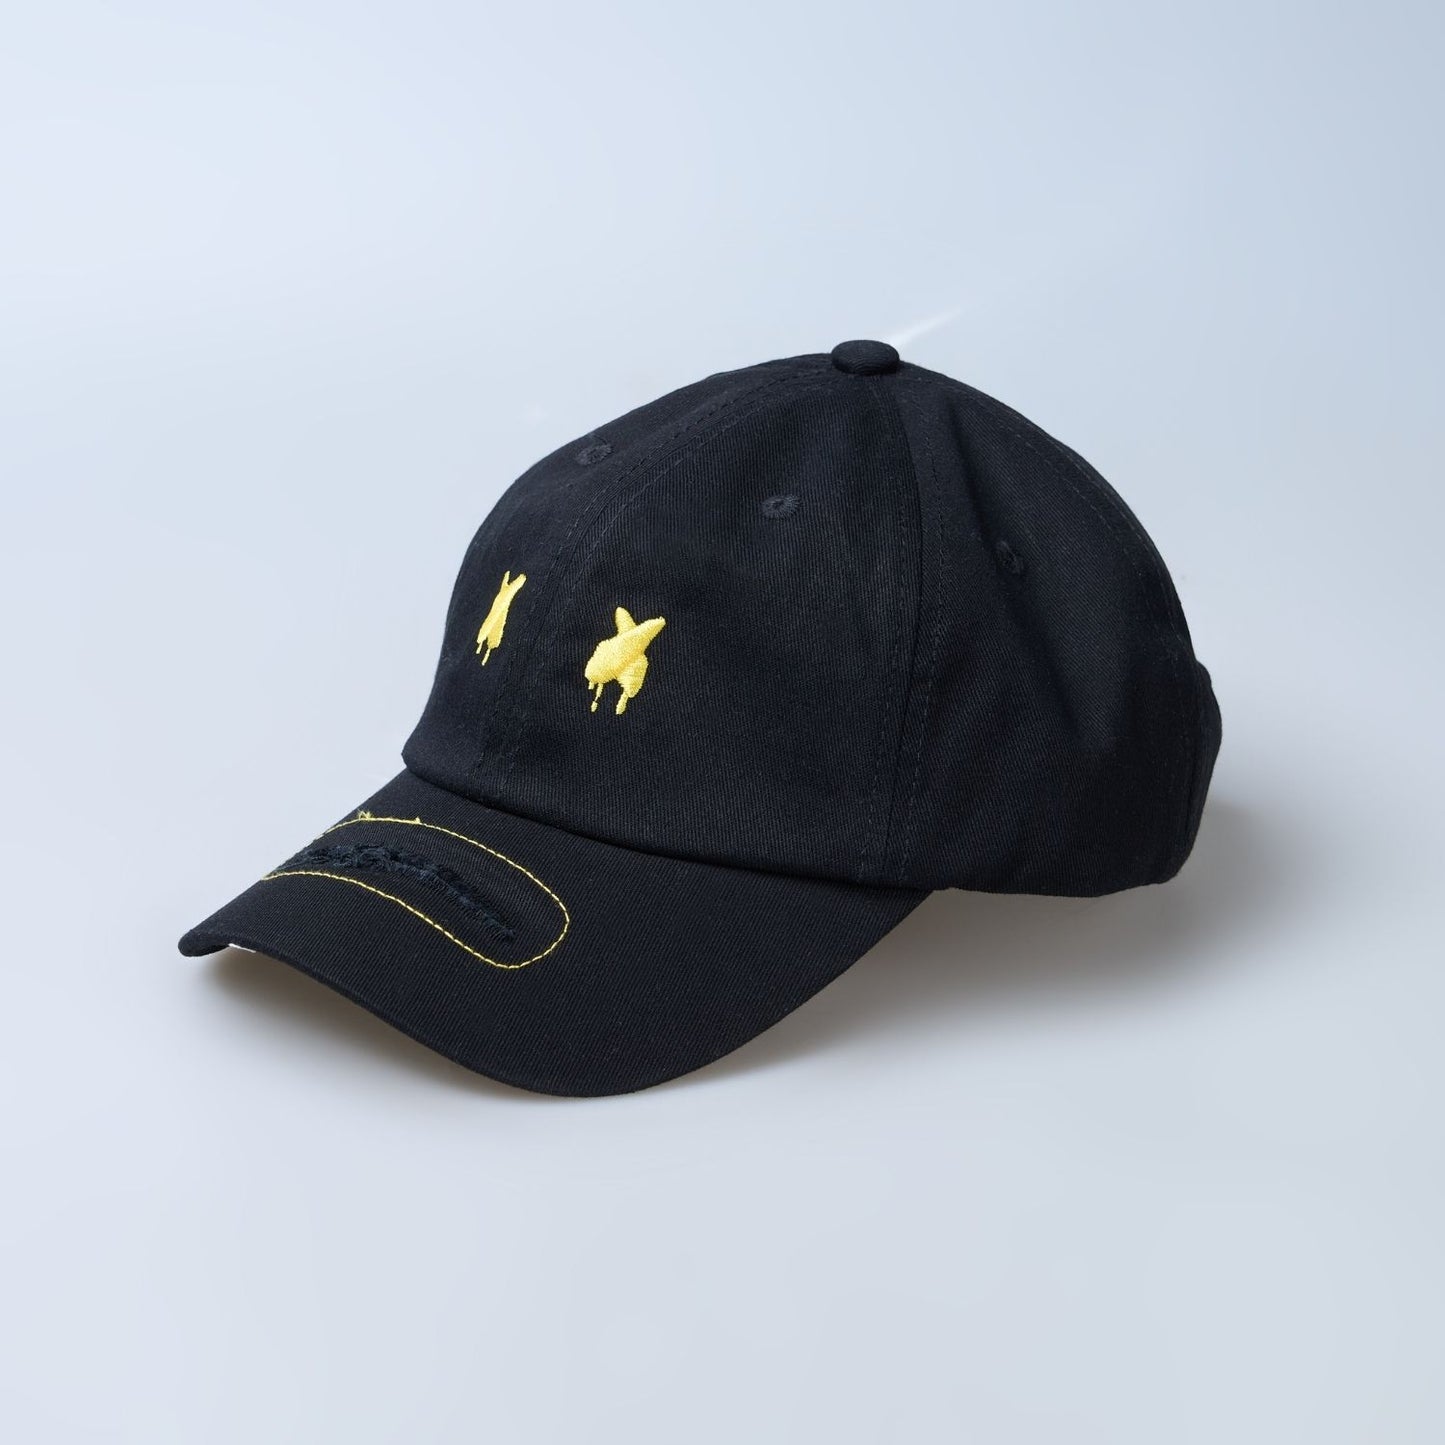 Close up of Black colored solid basic cap for men.